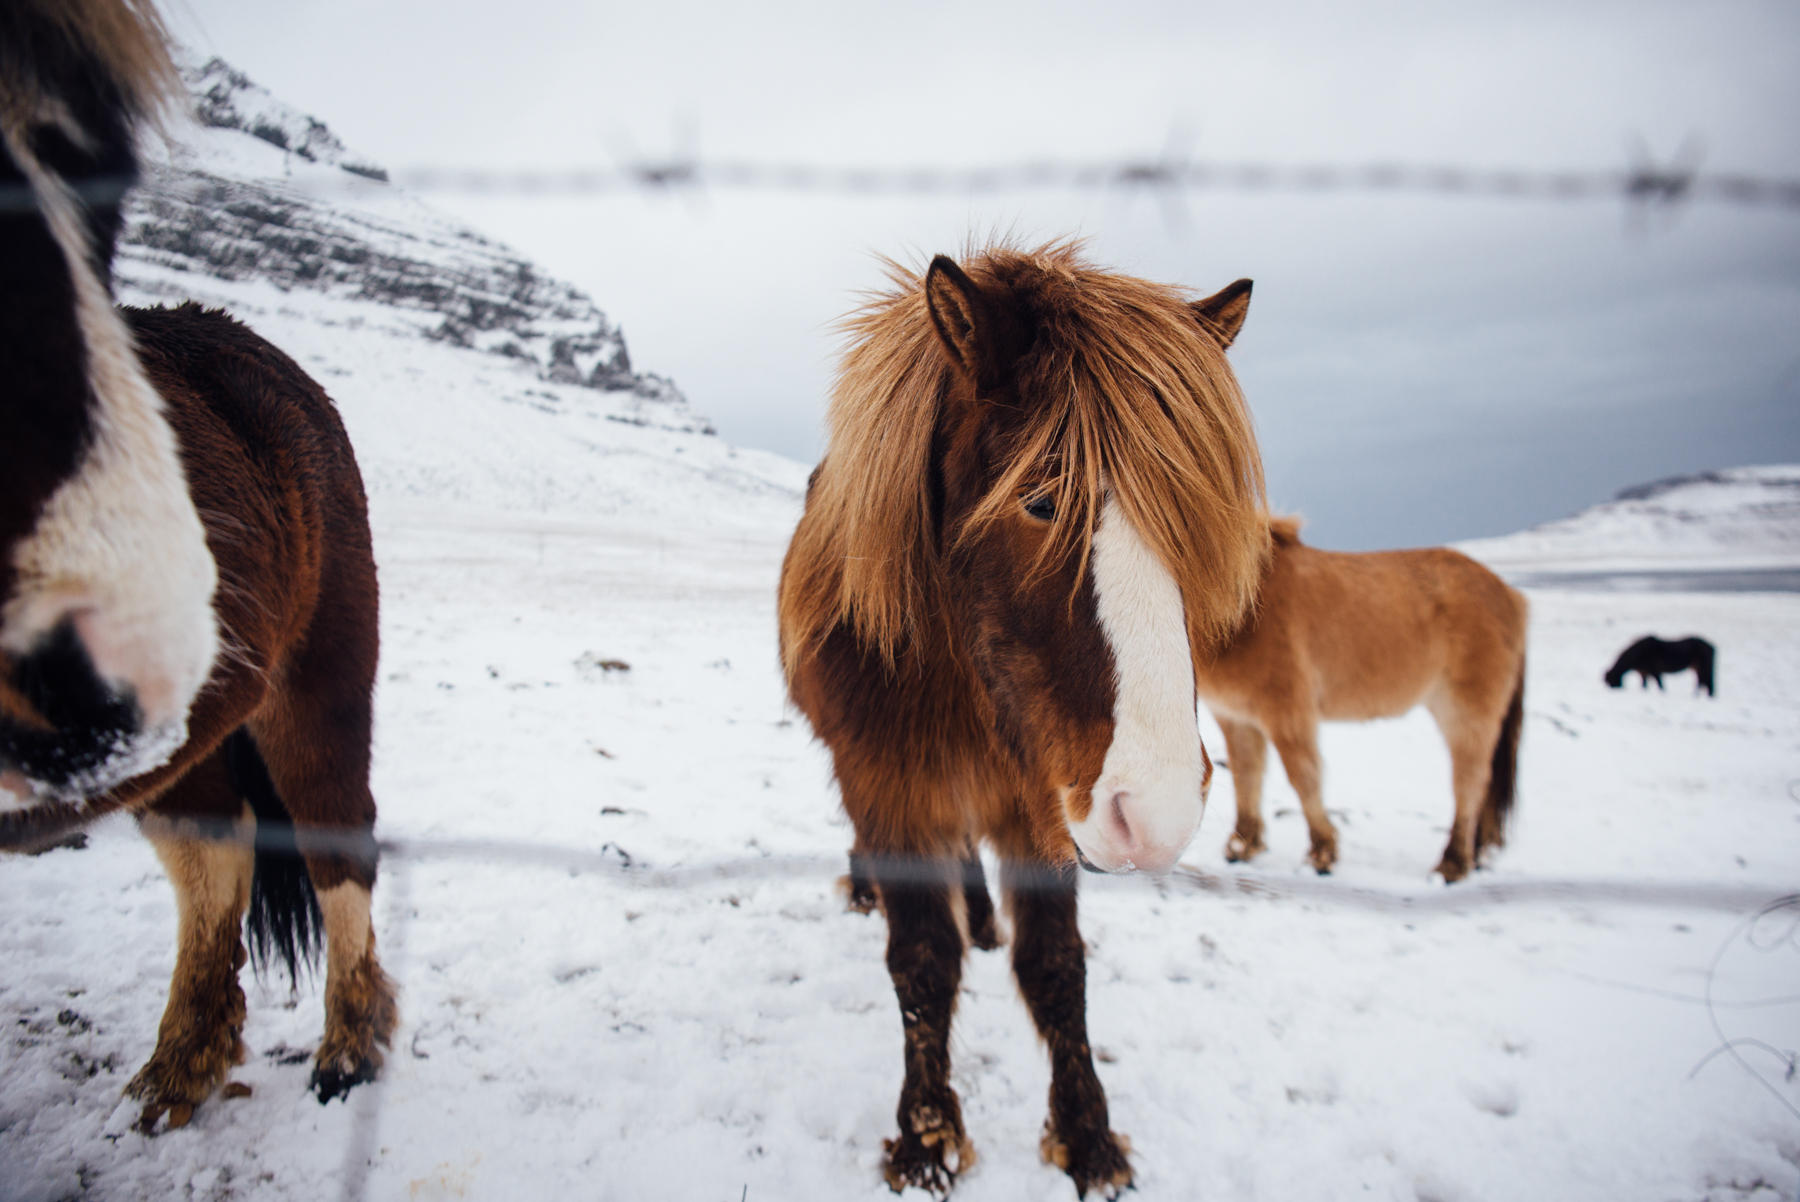 Iceland – Kirkjufell mountain and waterfall and horses. Trip to Iceland with Katie and Holly 1/1-1/7.